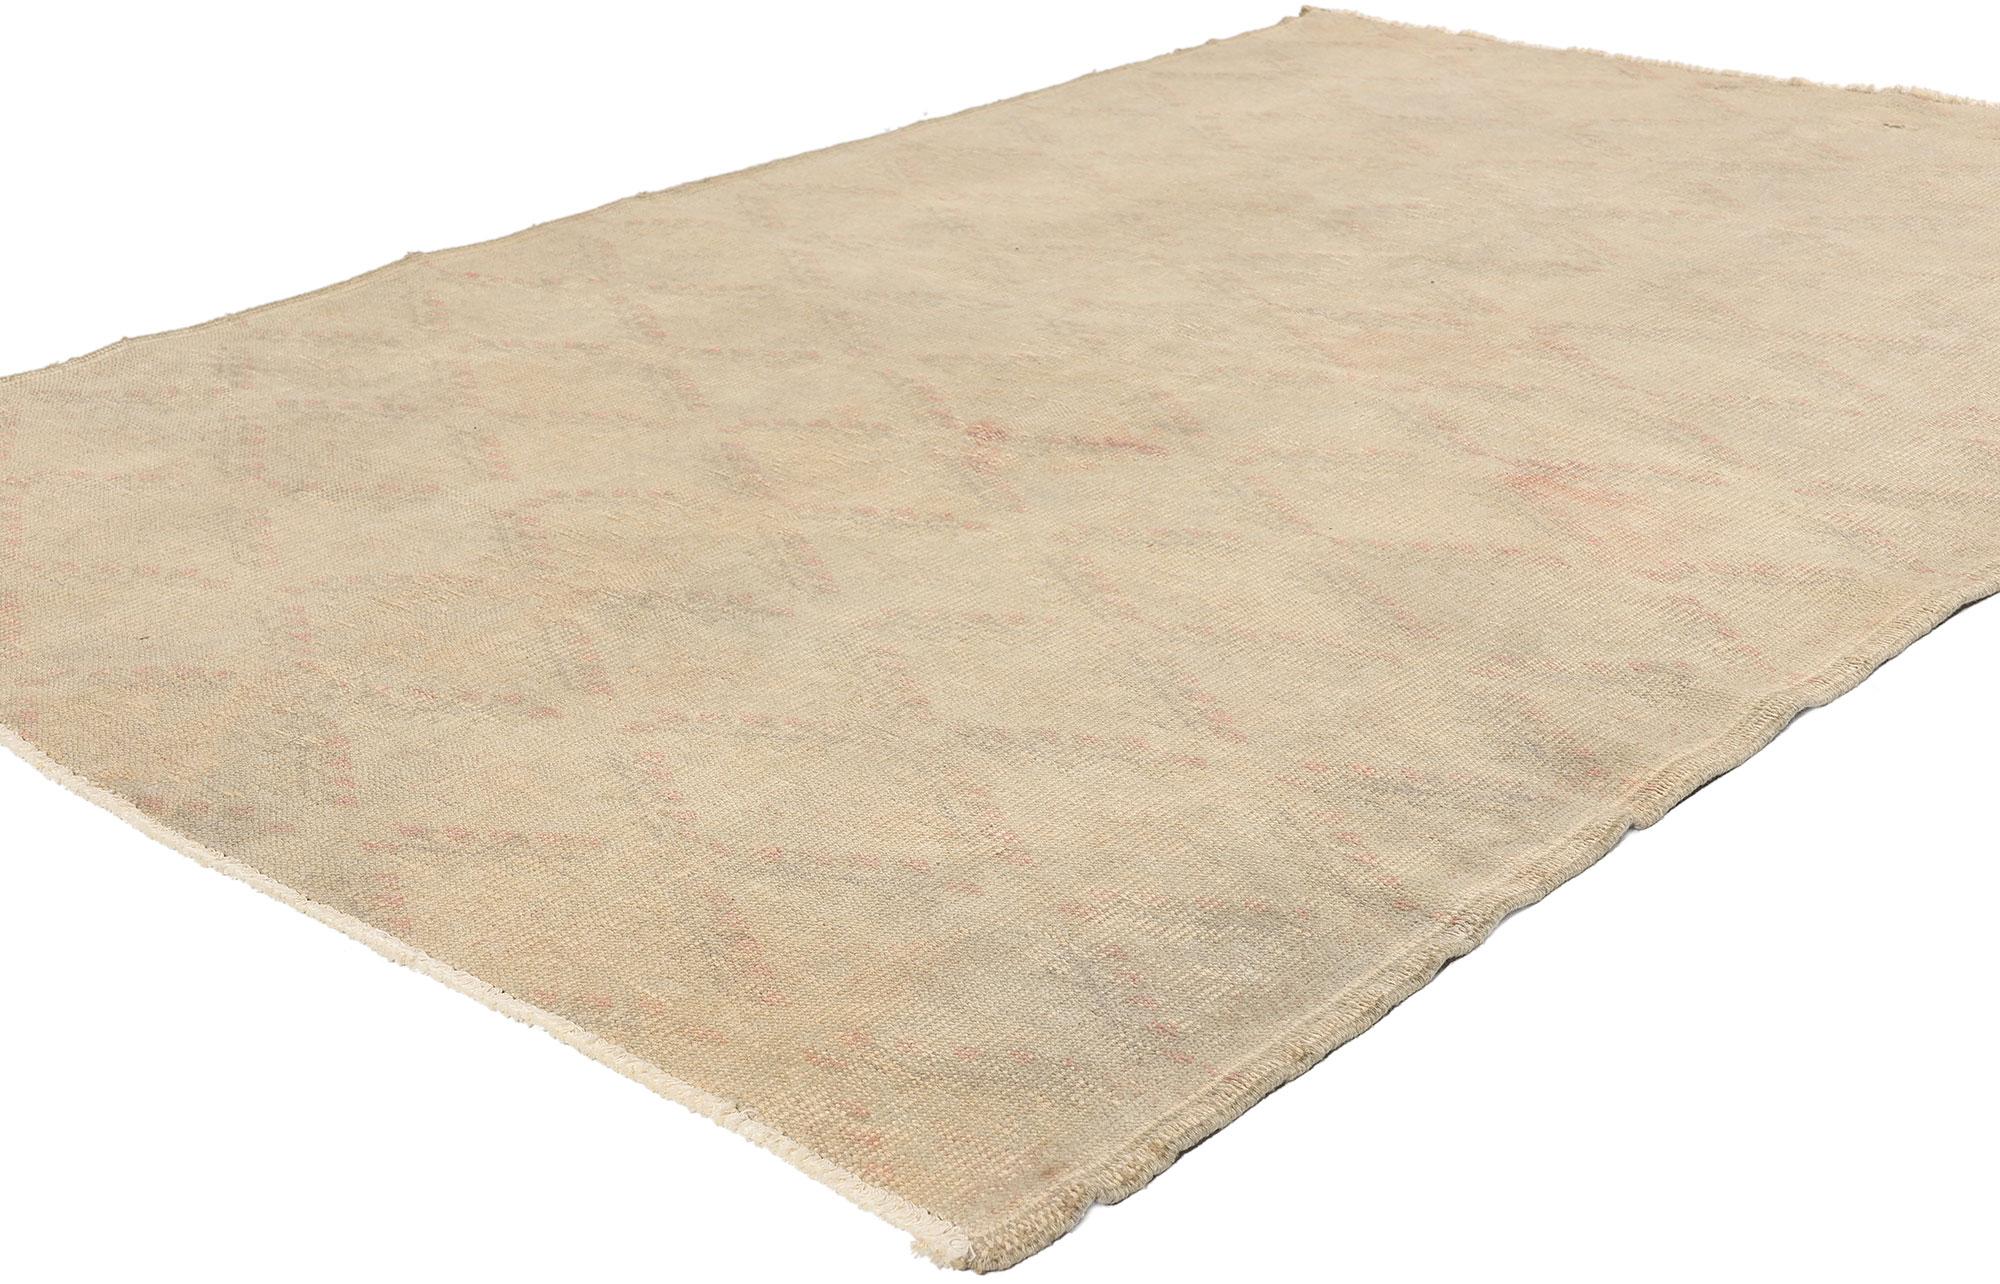 51988 Distressed Vintage Turkish Sivas Rug, 05'00 x 07'06. Combining the elegance of French Provincial design with a relaxed refinement, this hand-knotted wool distressed vintage Turkish Sivas rug evokes a sense of timeless charm and sophistication.